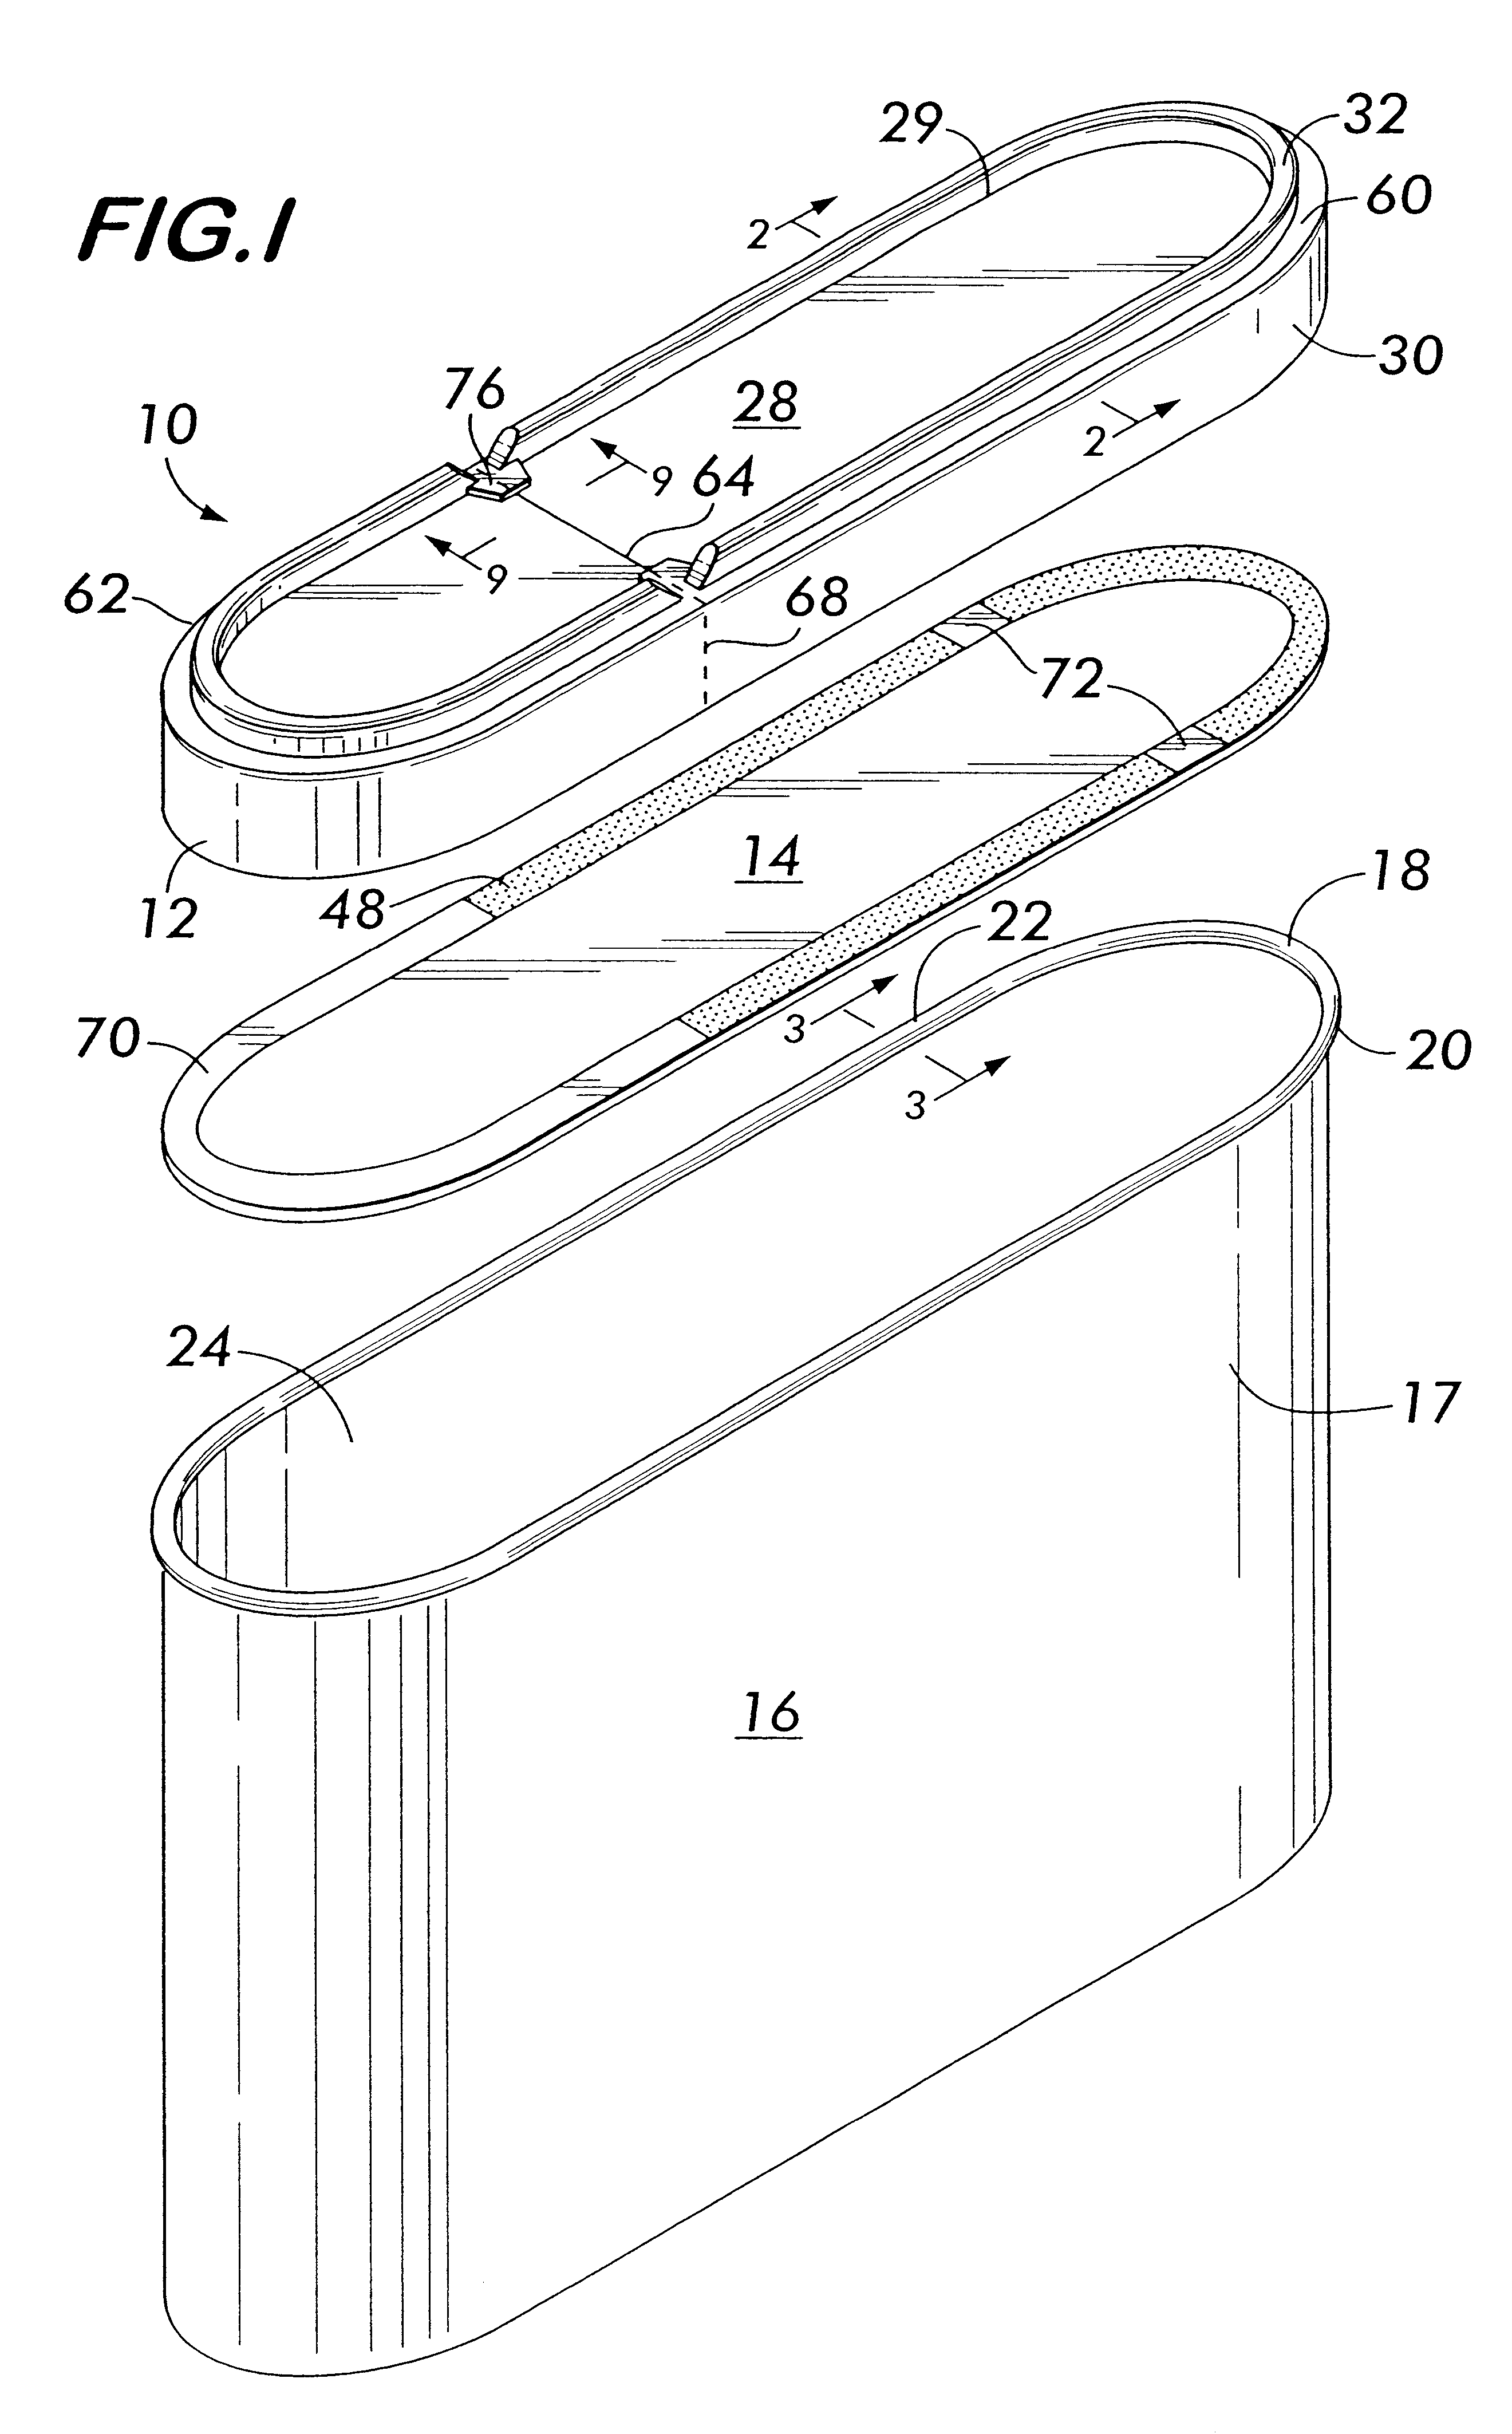 Stackable hinged container lid having detents